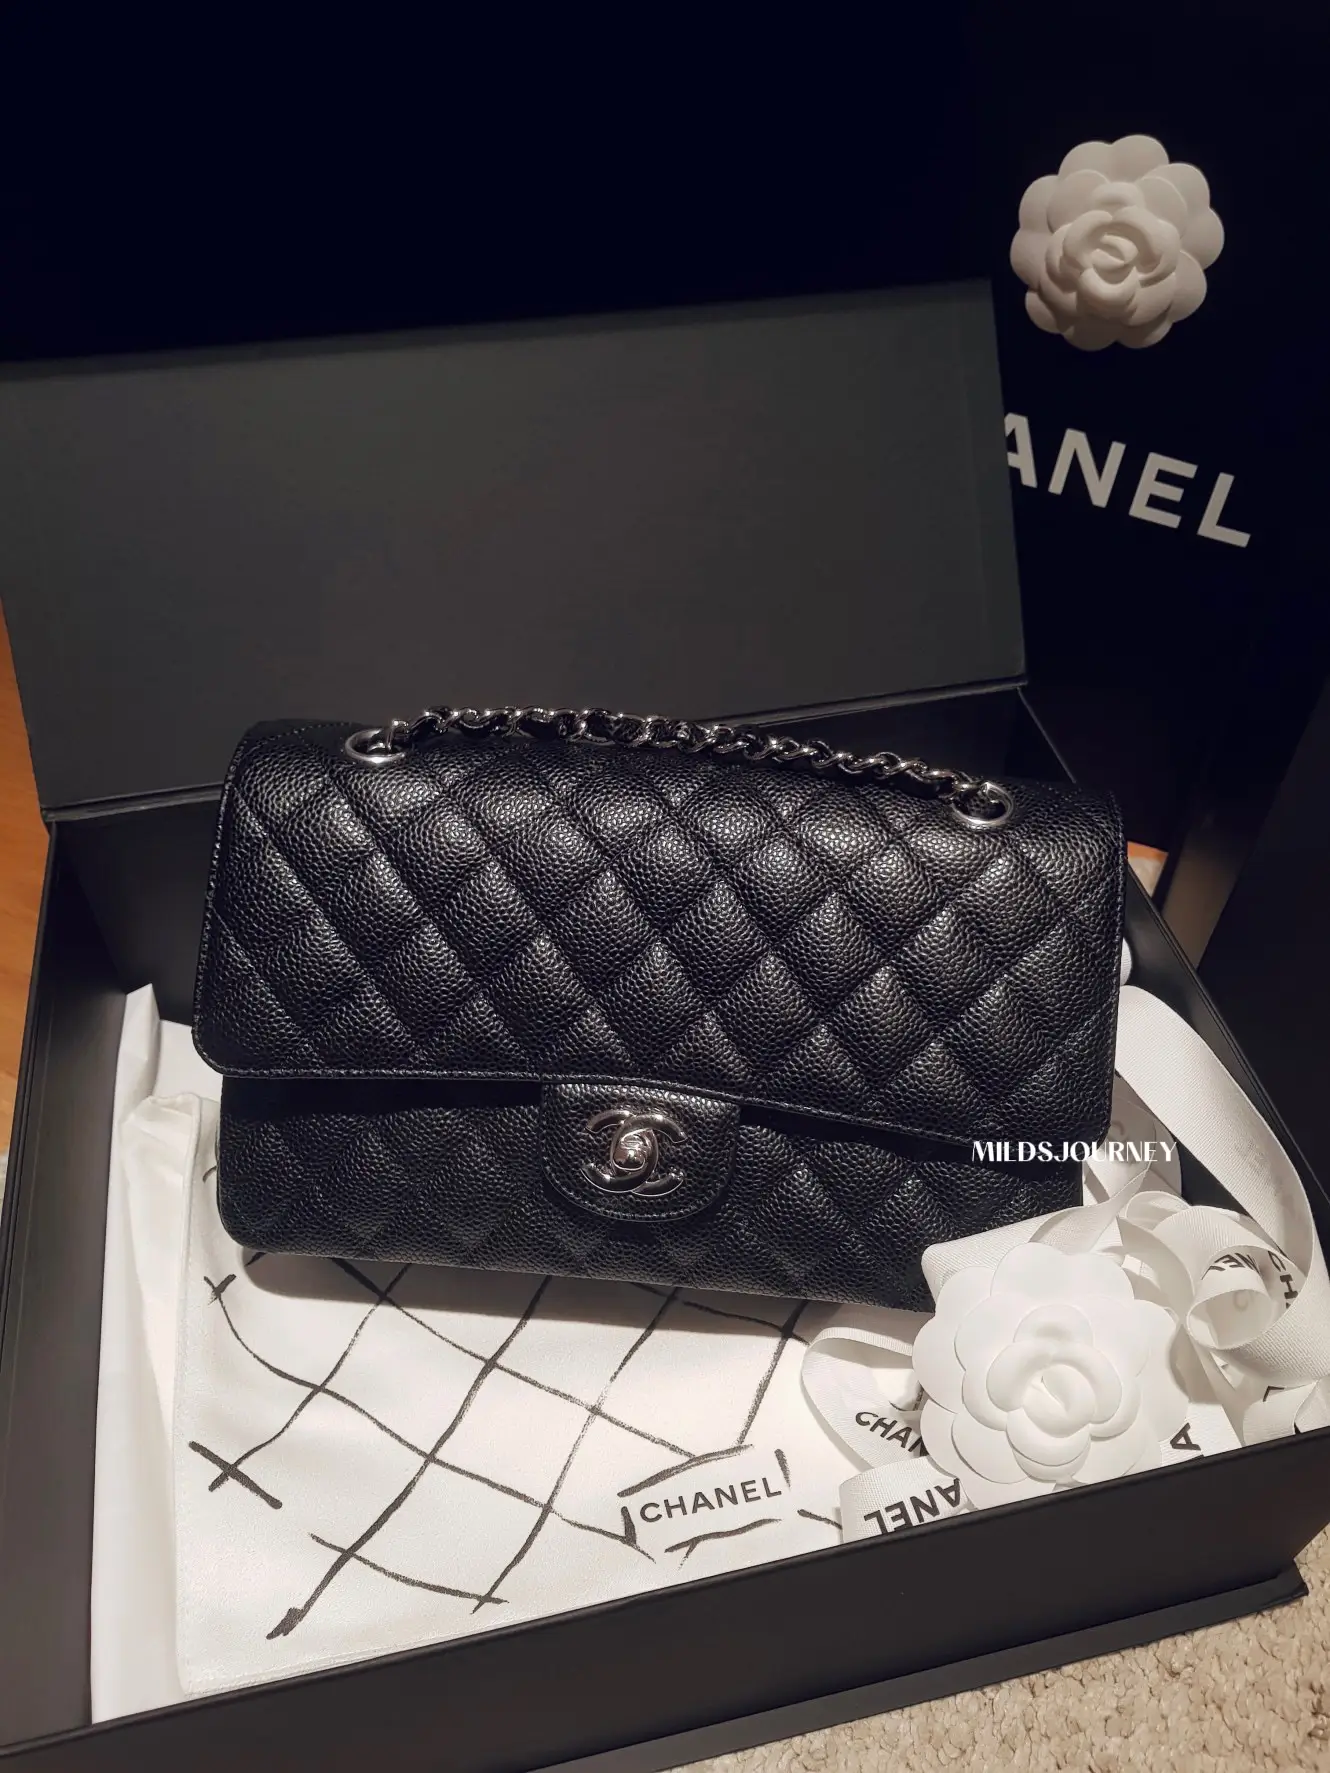 X 上的 Personal Shopper：「Client requested Chanel loafers. A style investment  that will stand the test of time. A classic Collection #Chanel  #chanelloafers #classiccollection #styleinvestment #clothingbrand  #vipconcierge #imageconsulta